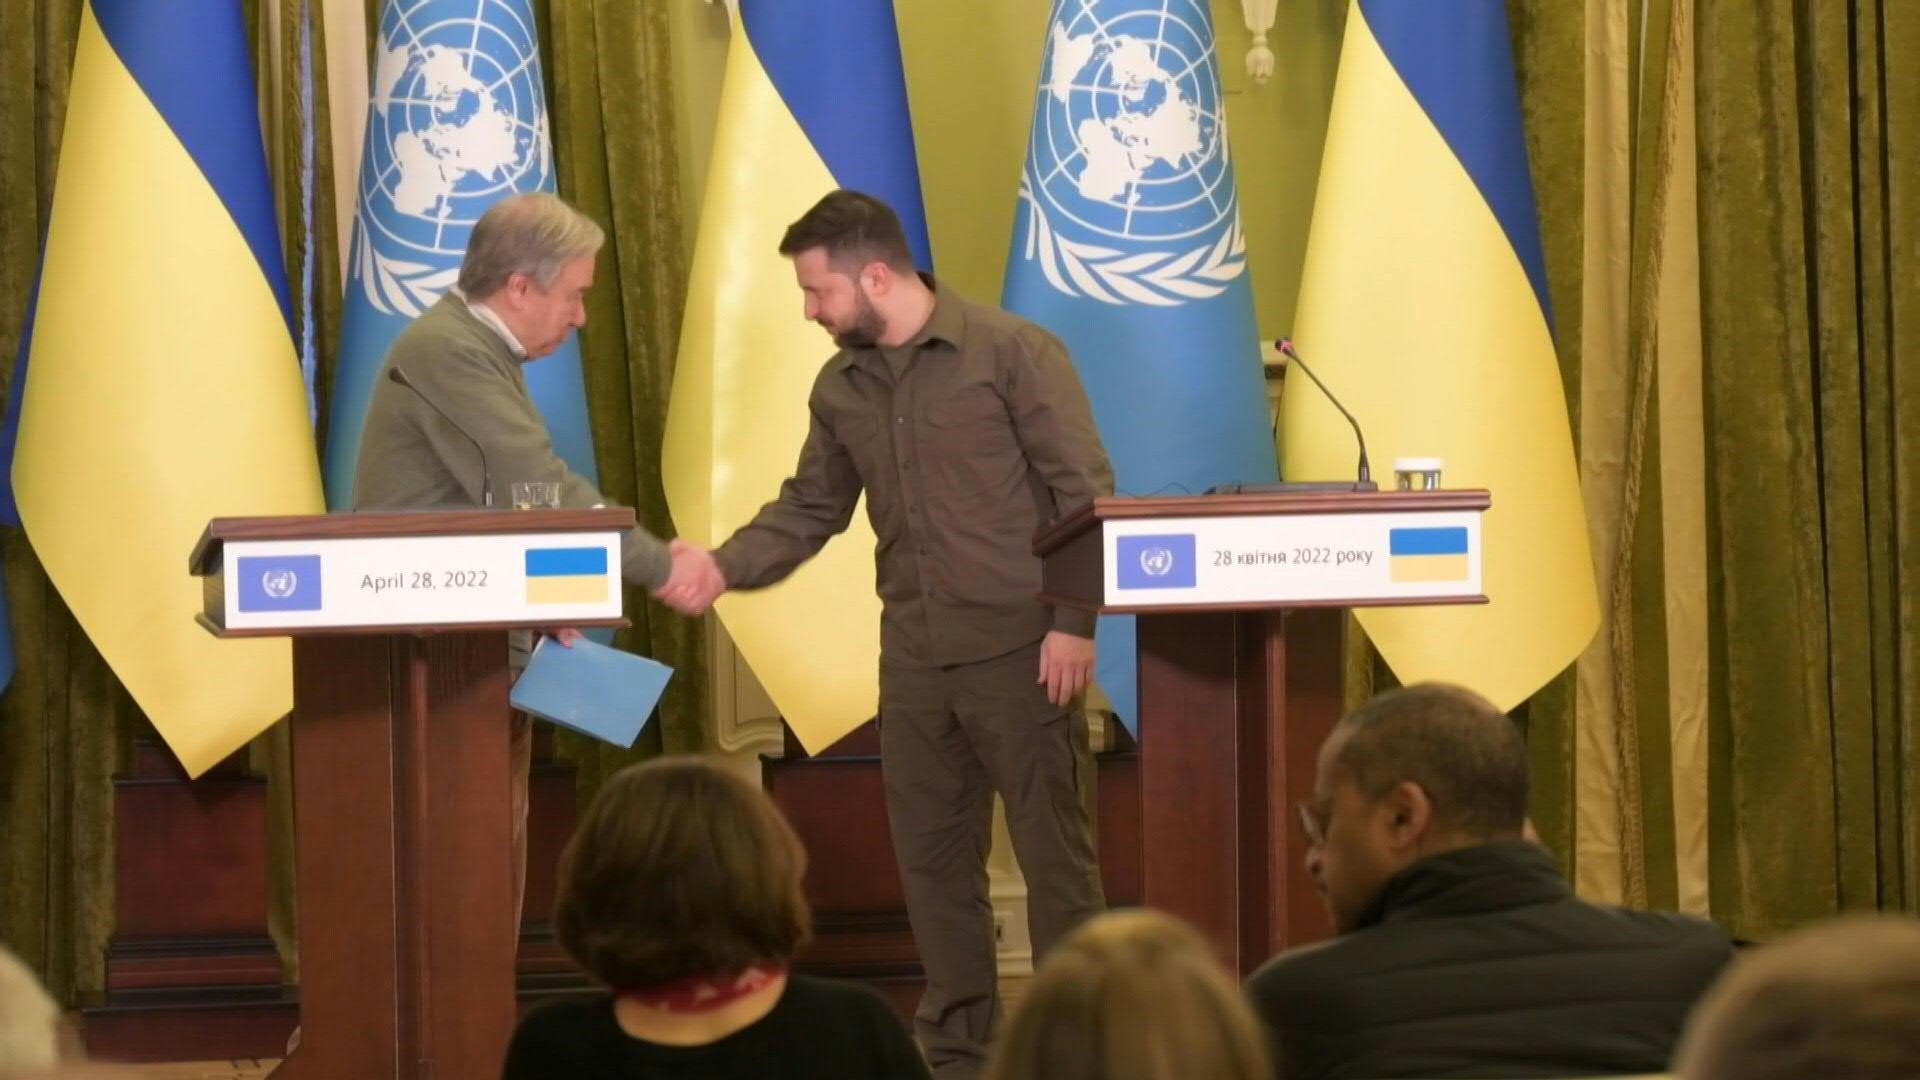 After a bilateral meeting on the opening of a humanitarian corridor between Mariupol and Zaporizhia, Zhelensky and Guterres greet each other in public before giving a press conference in Kiev.